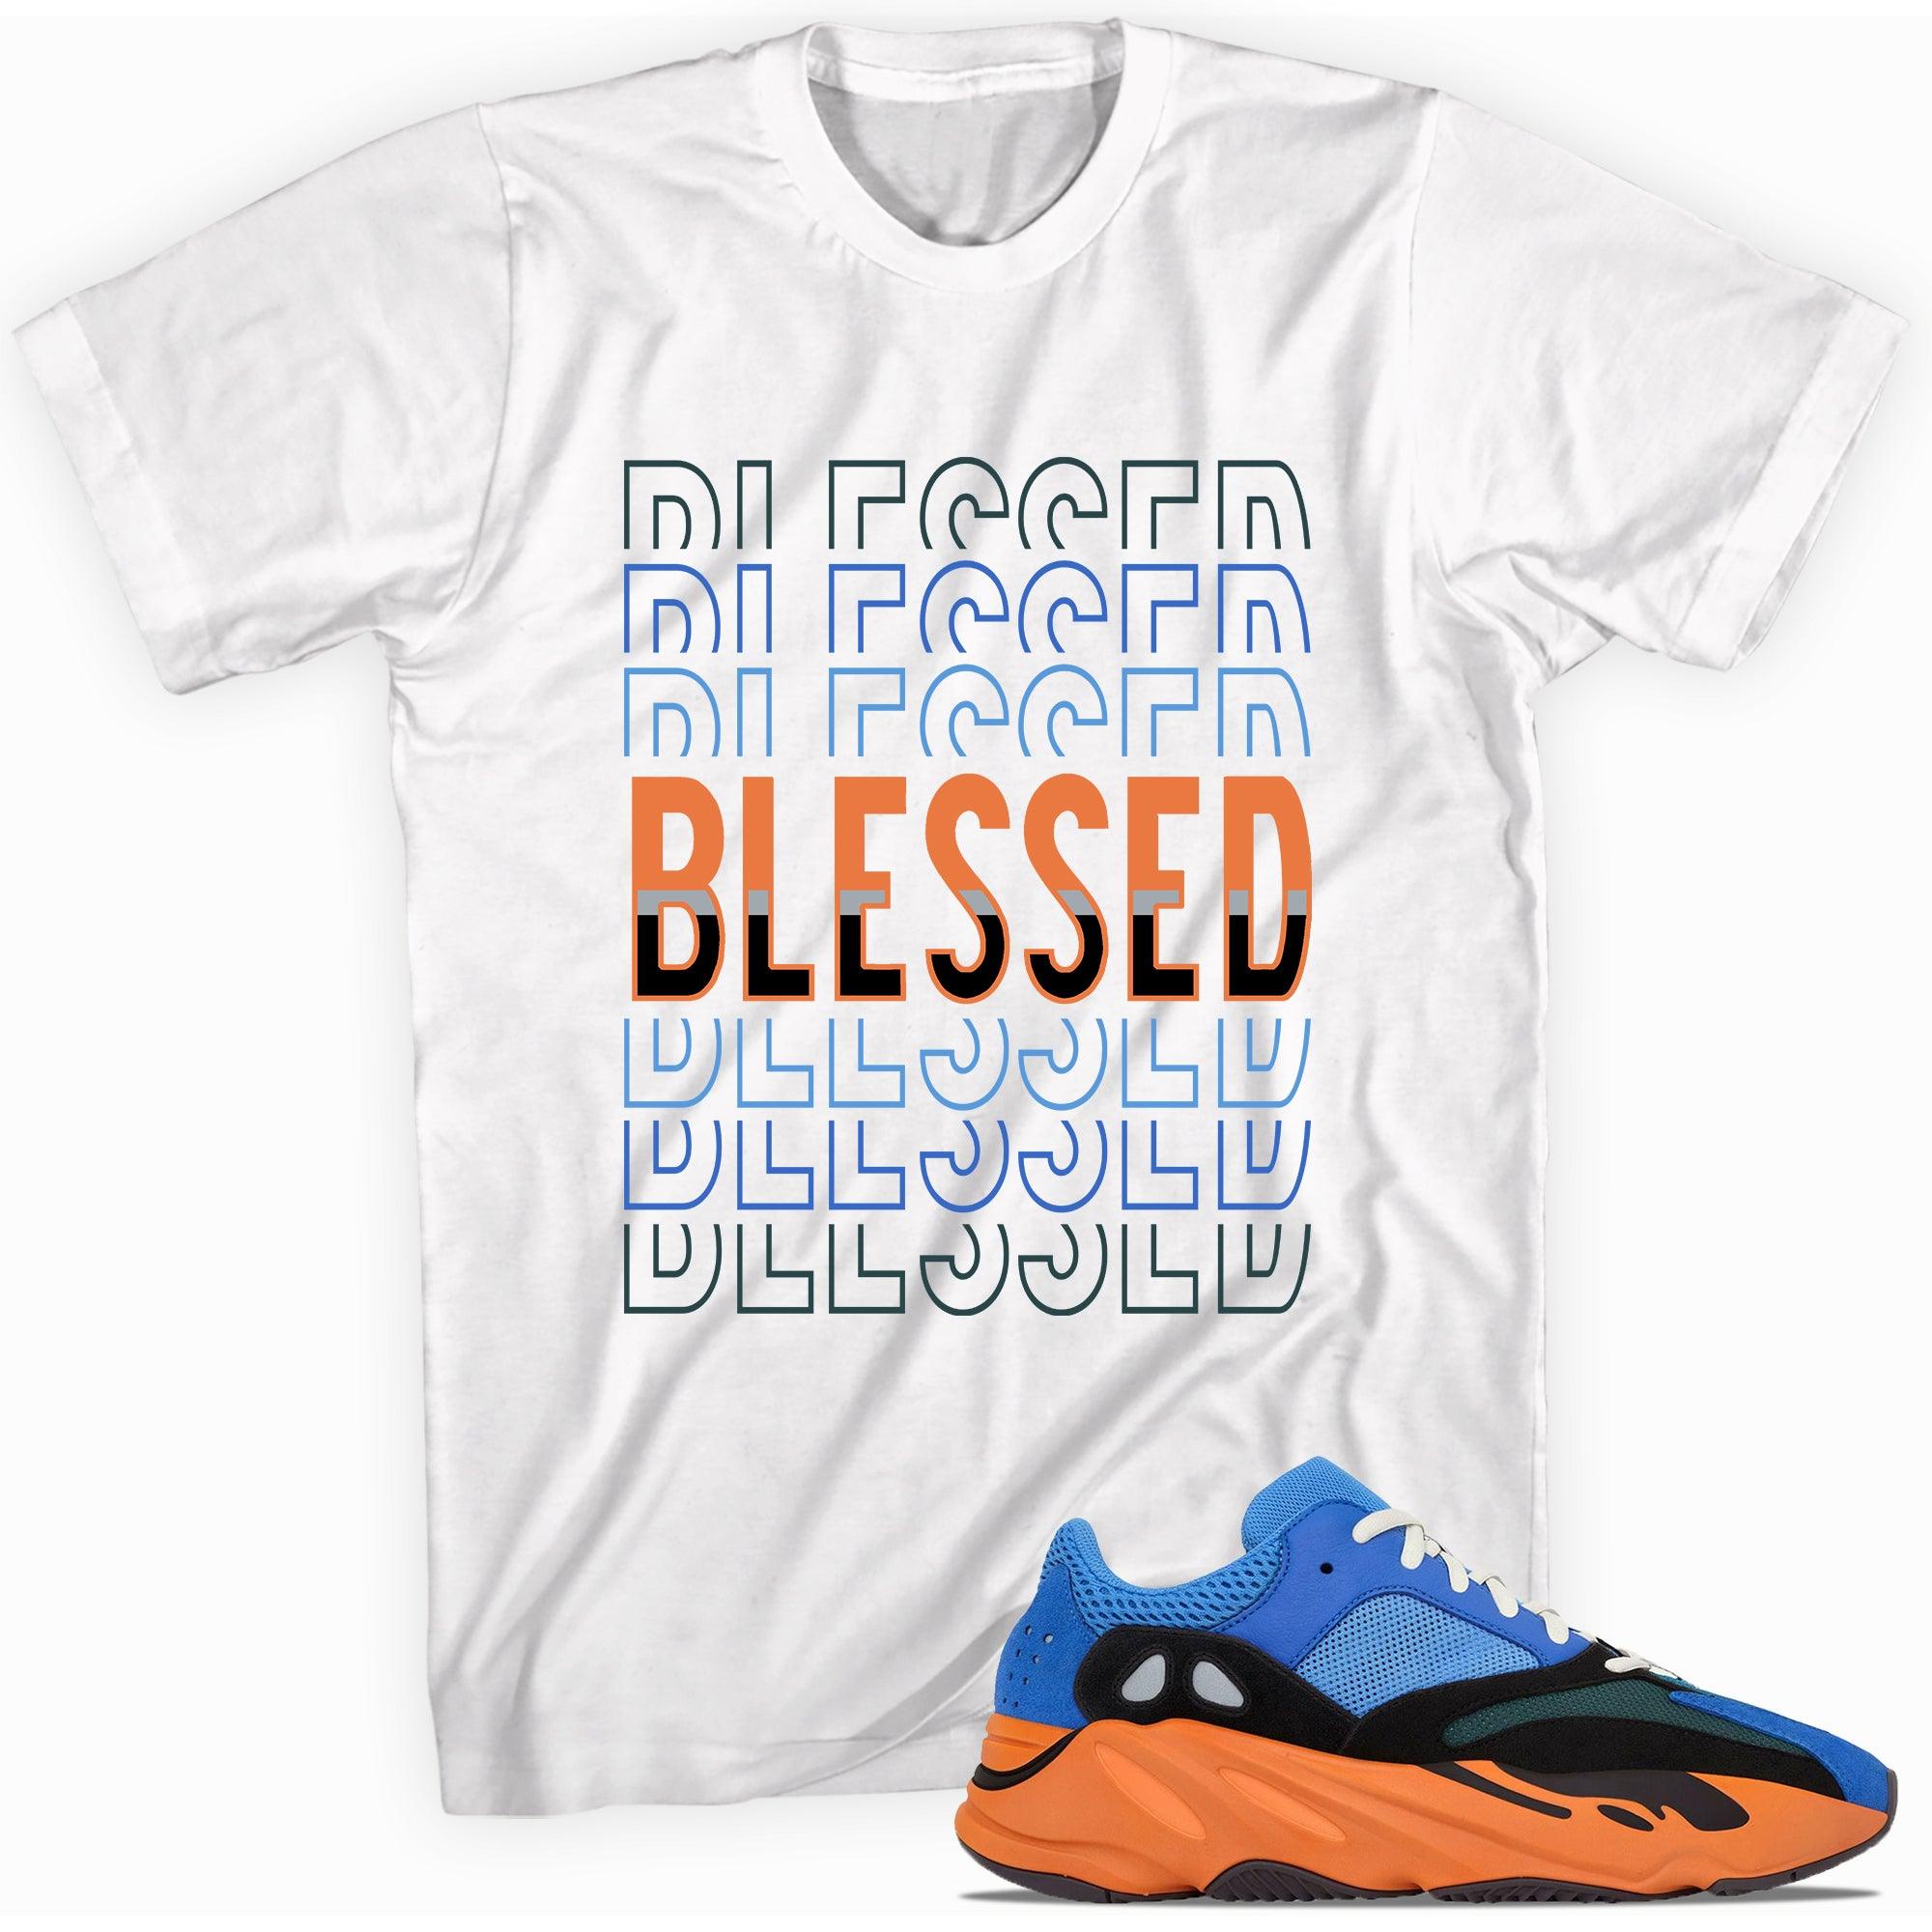 Blessed Shirt Yeezy Boost 700 Bright Blue photo